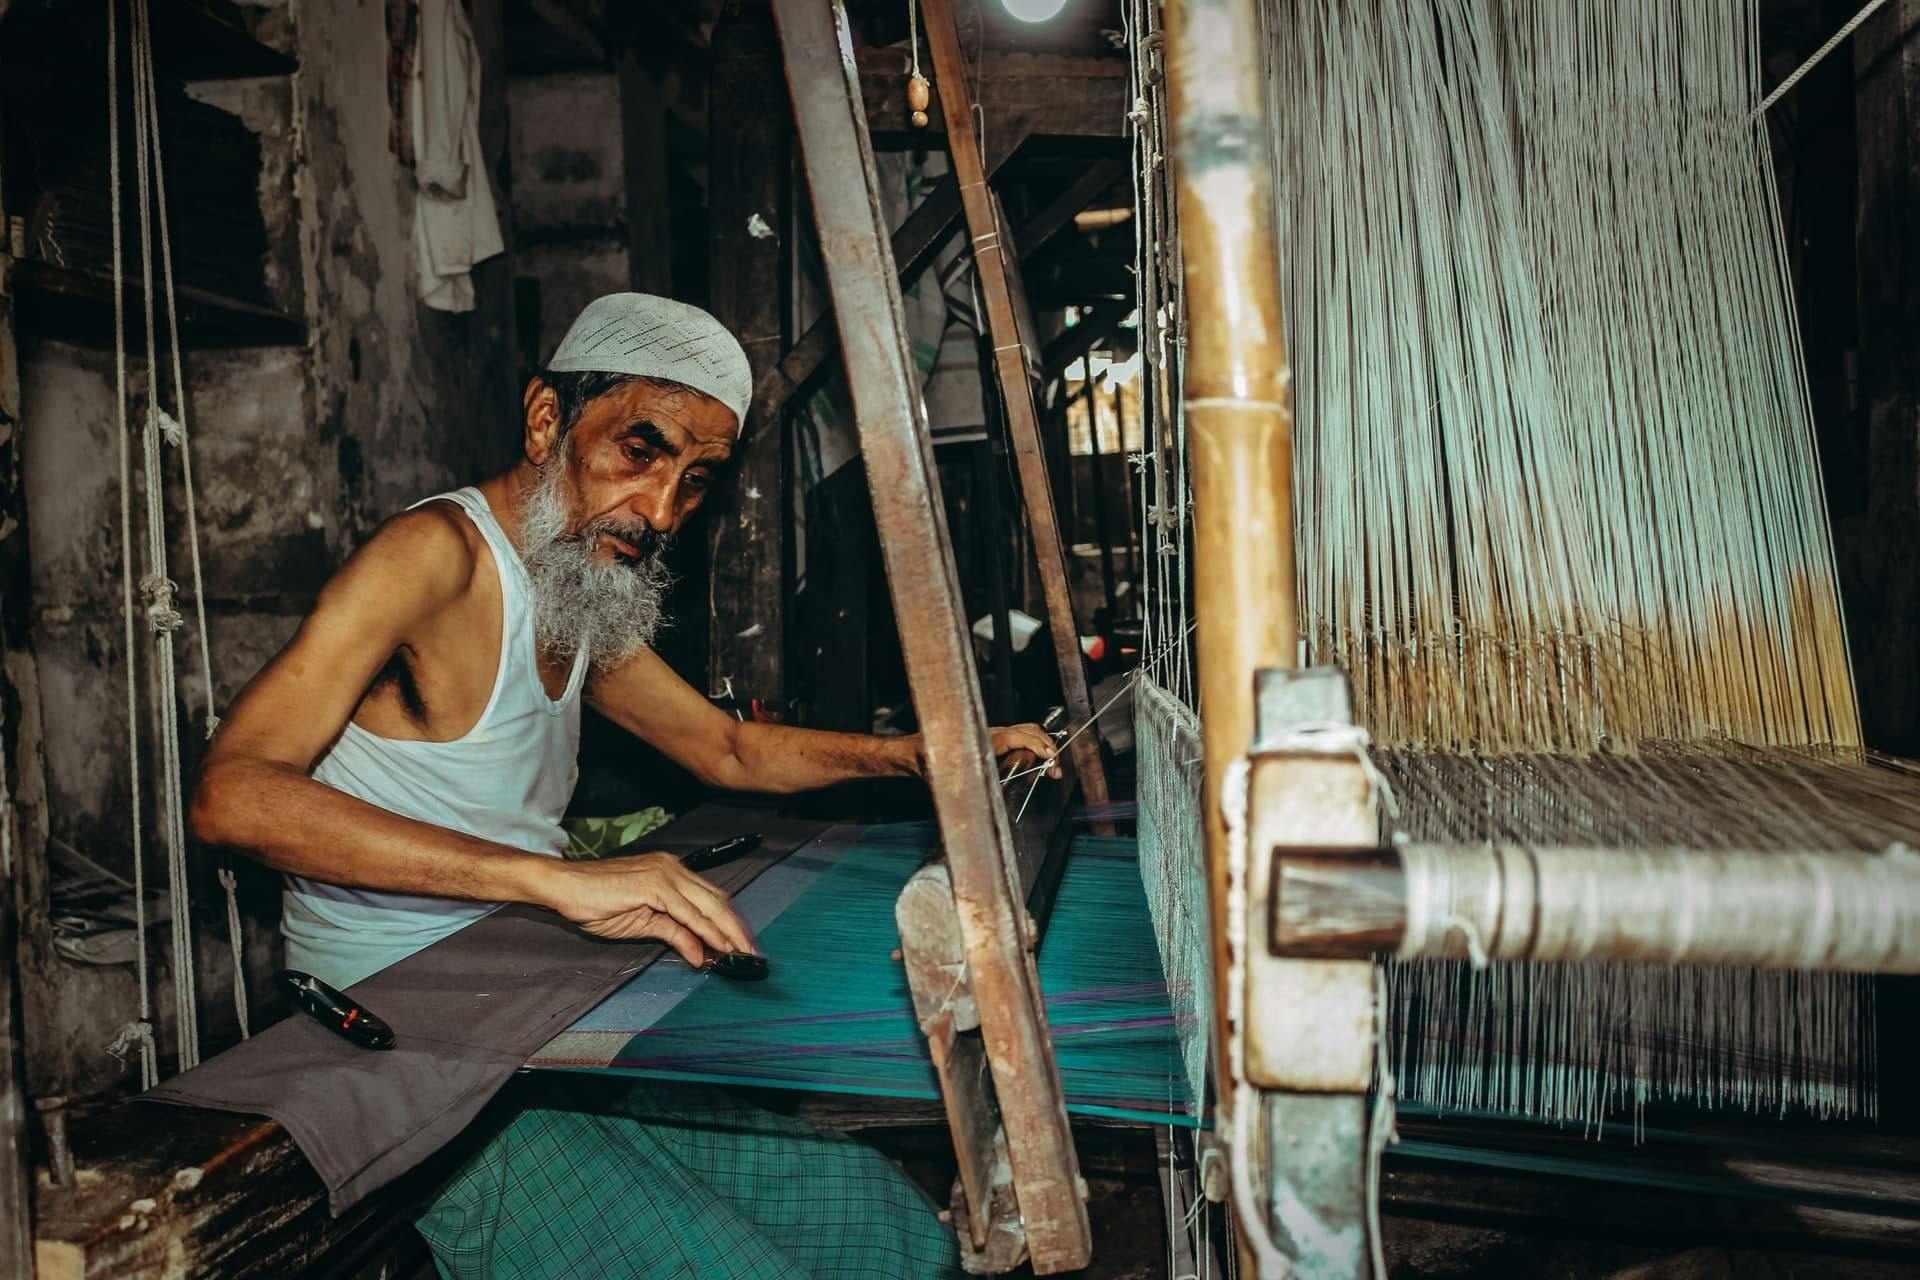 A weaver on the loom in Jaipur